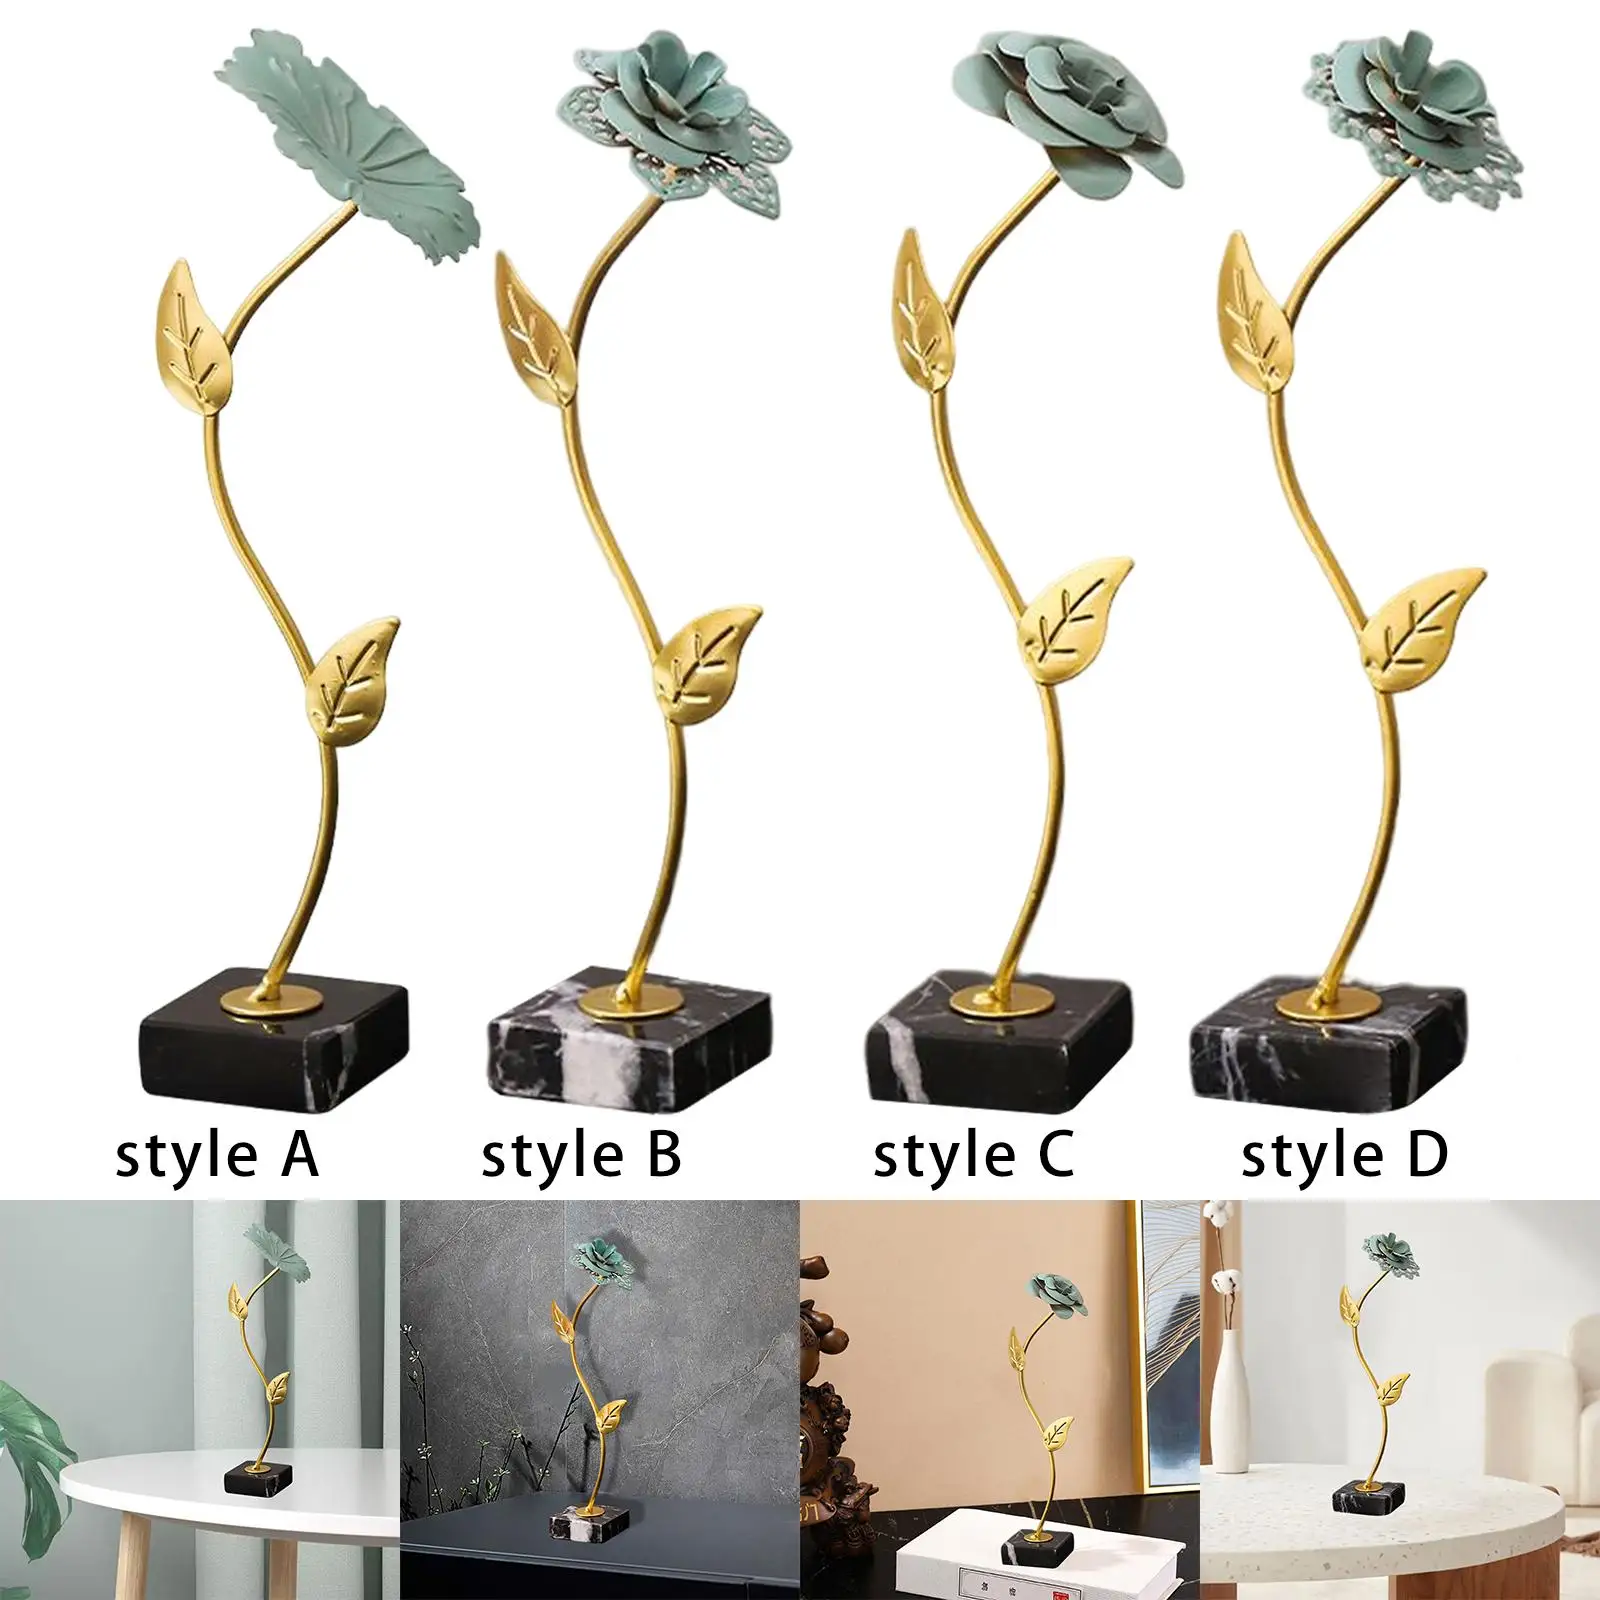 Creative Leaf Statues Handicraft Collectible Metal Ornaments with Base Sculpture for Office Desk Dining Room Decor Photo Props